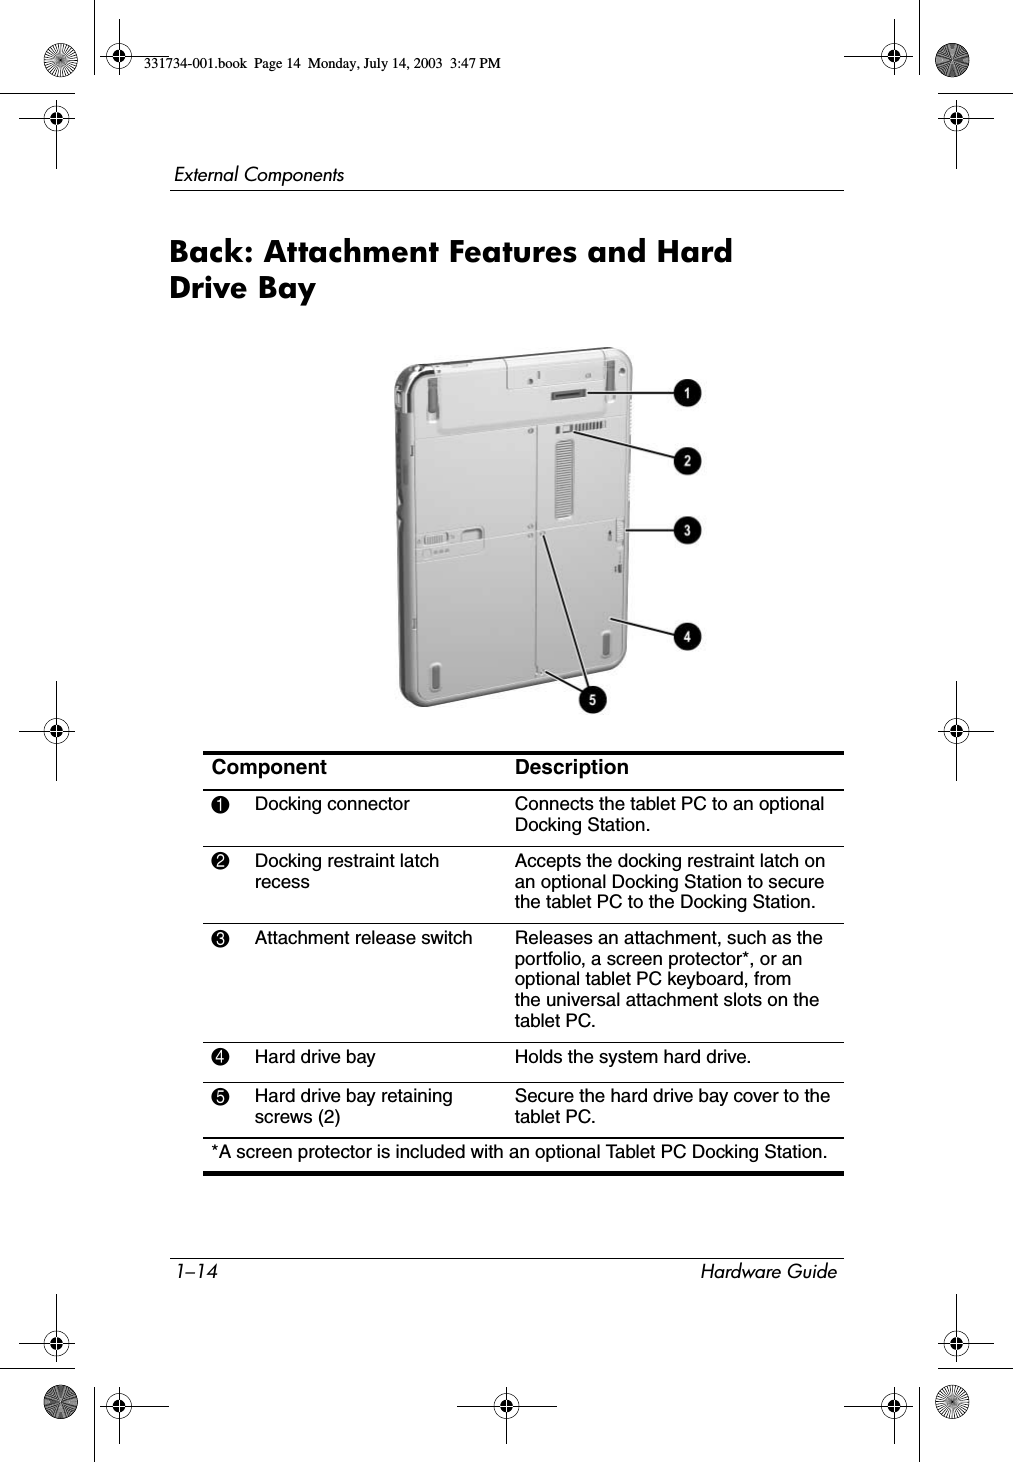 1–14 Hardware GuideExternal ComponentsBack: Attachment Features and Hard Drive Bay Component Description1Docking connector Connects the tablet PC to an optional Docking Station.2Docking restraint latch recessAccepts the docking restraint latch on an optional Docking Station to secure the tablet PC to the Docking Station.3Attachment release switch Releases an attachment, such as the portfolio, a screen protector*, or an optional tablet PC keyboard, from the universal attachment slots on the tablet PC.4Hard drive bay Holds the system hard drive.5Hard drive bay retaining screws (2)Secure the hard drive bay cover to the tablet PC.*A screen protector is included with an optional Tablet PC Docking Station.331734-001.book  Page 14  Monday, July 14, 2003  3:47 PM